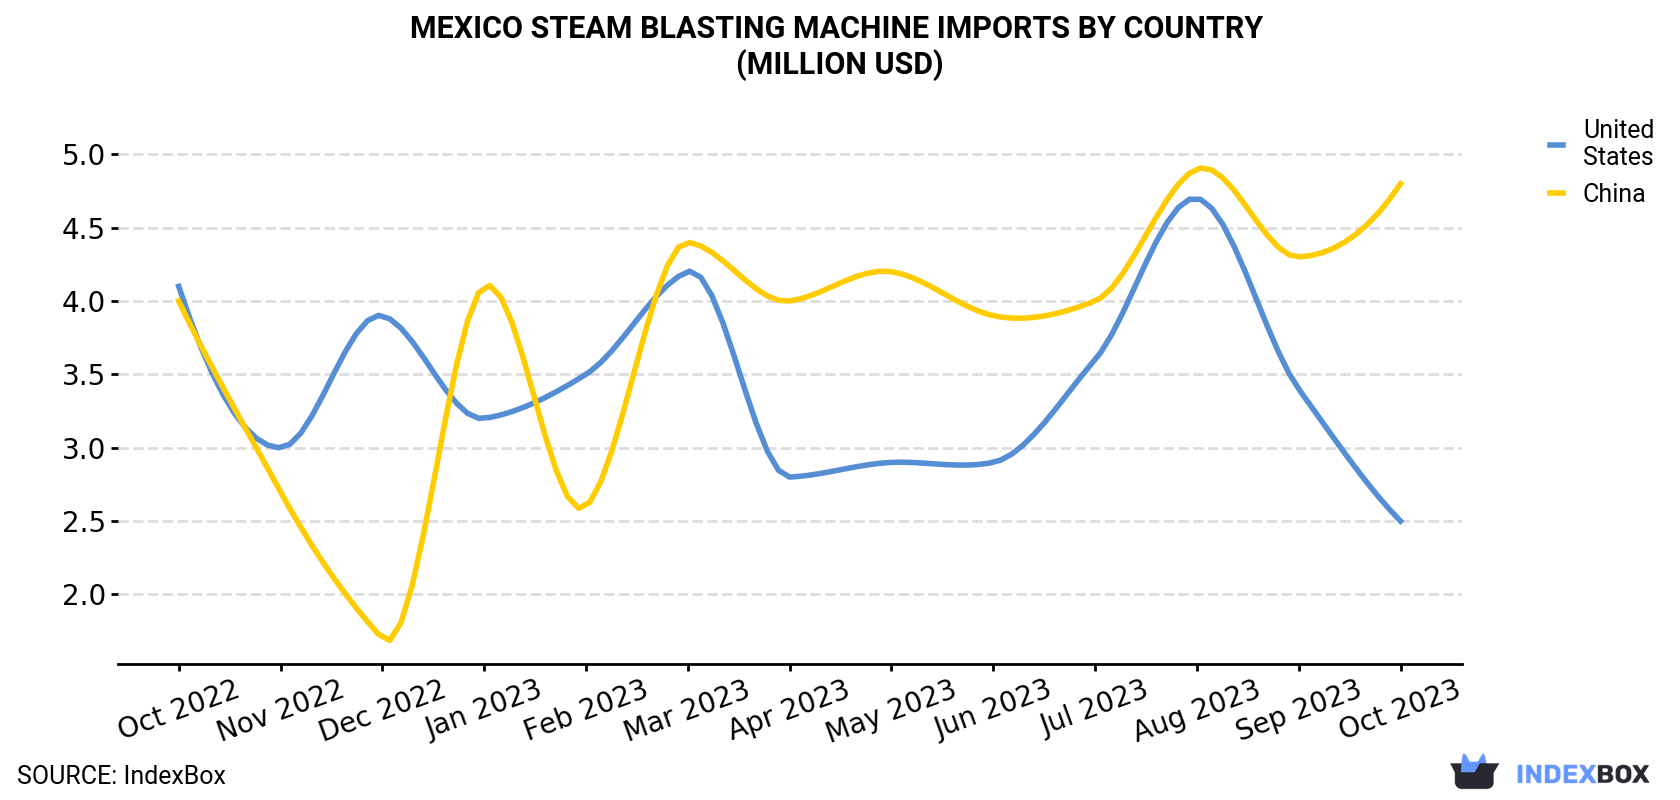 Mexico Steam Blasting Machine Imports By Country (Million USD)